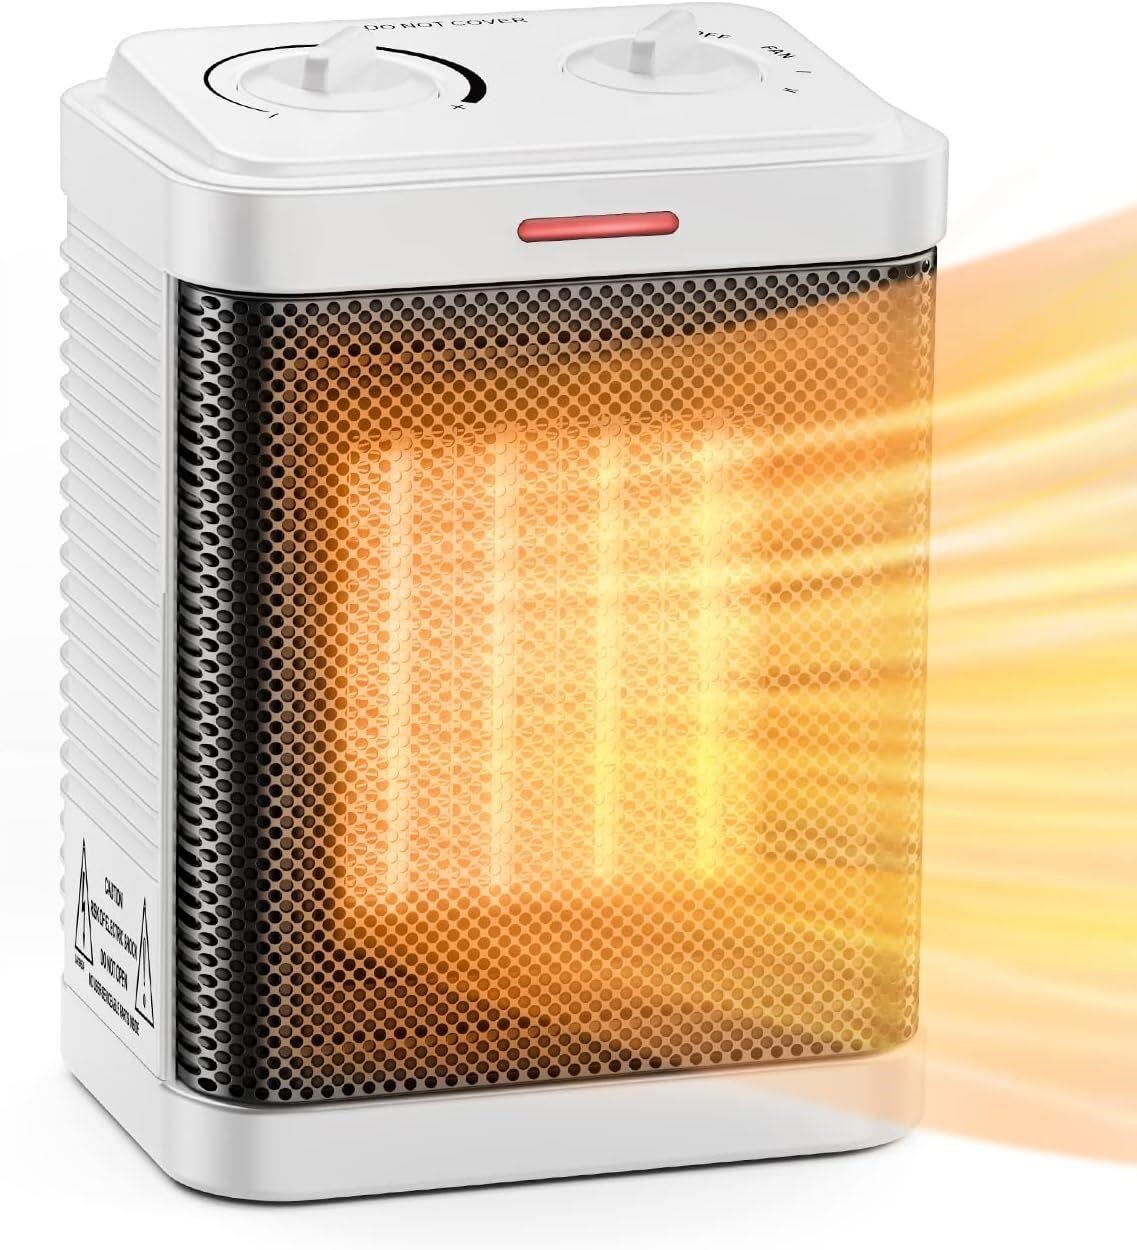 Space Heater for Indoor Use  1500W Ceramic Heater